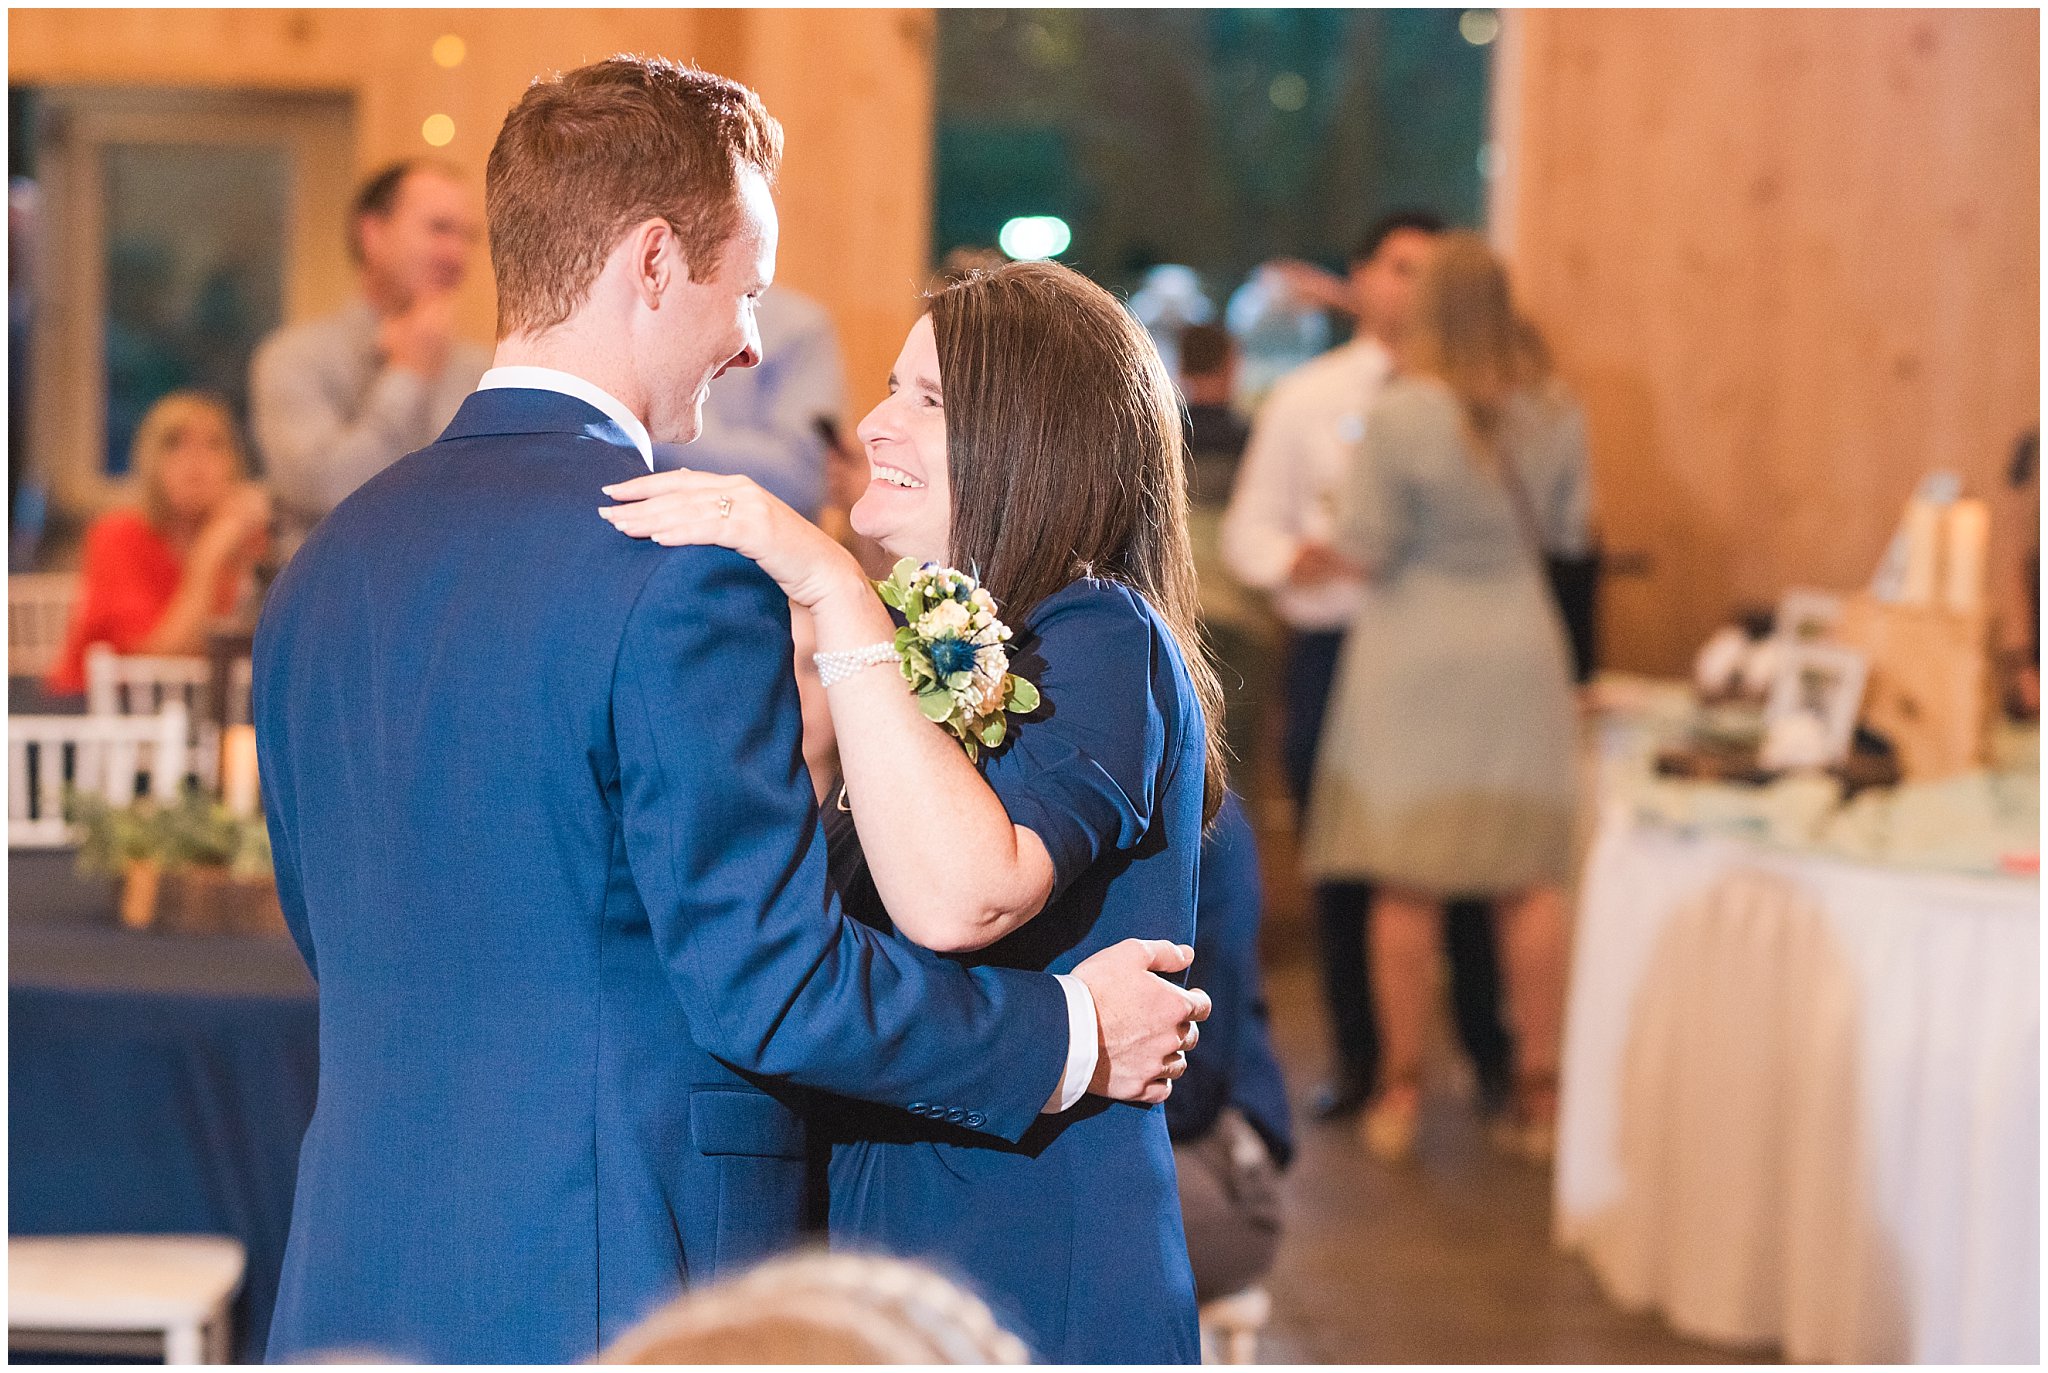 Mother son dance at wedding reception | Oak Hills Reception and Events Center | Jessie and Dallin Photography